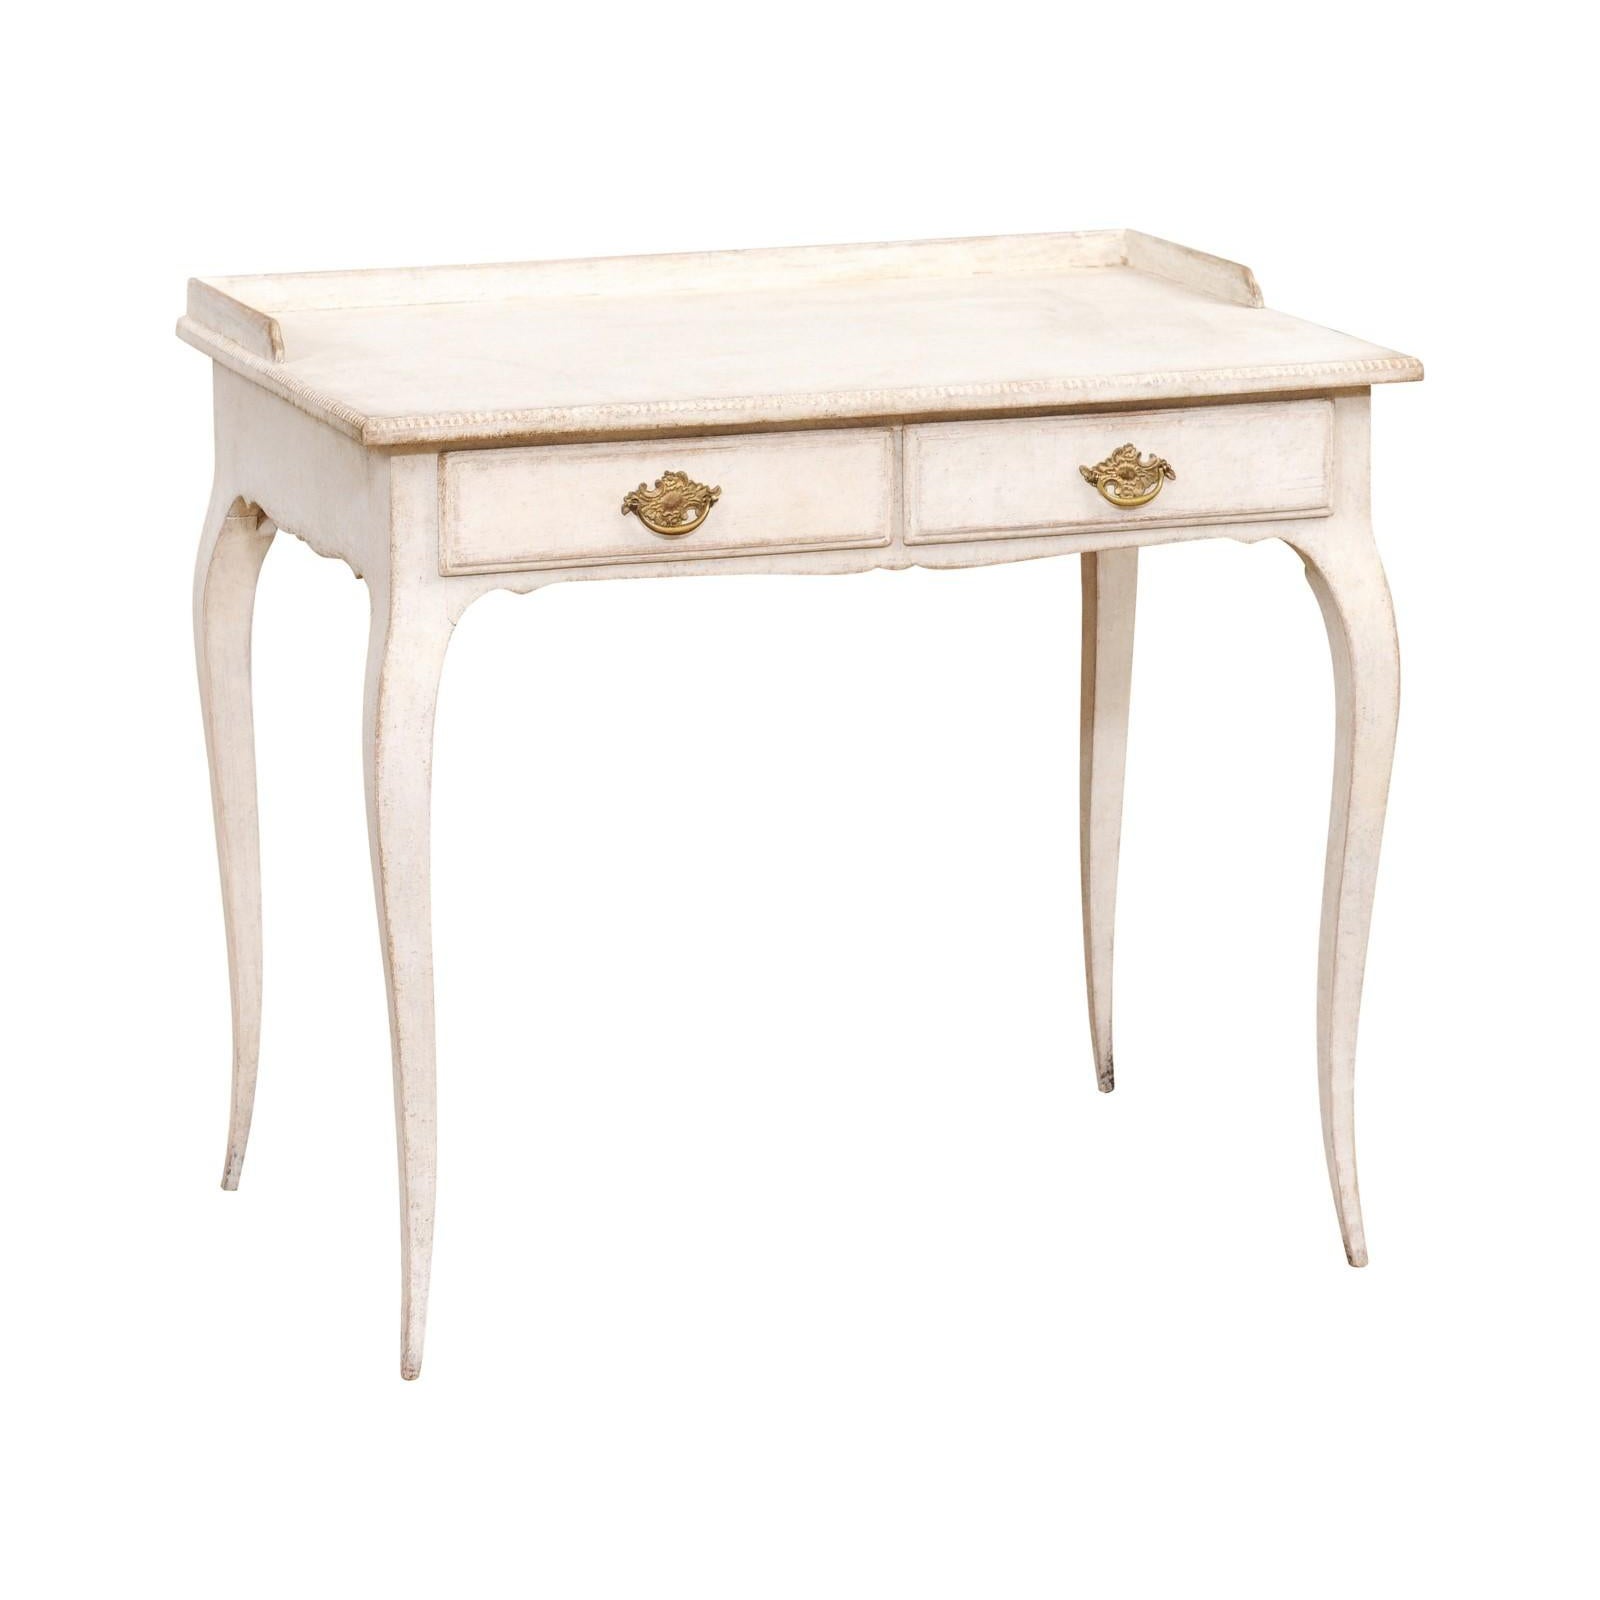 Swedish Rococo Style 1880s Light Painted Desk with Two Drawers and Cabriole Legs